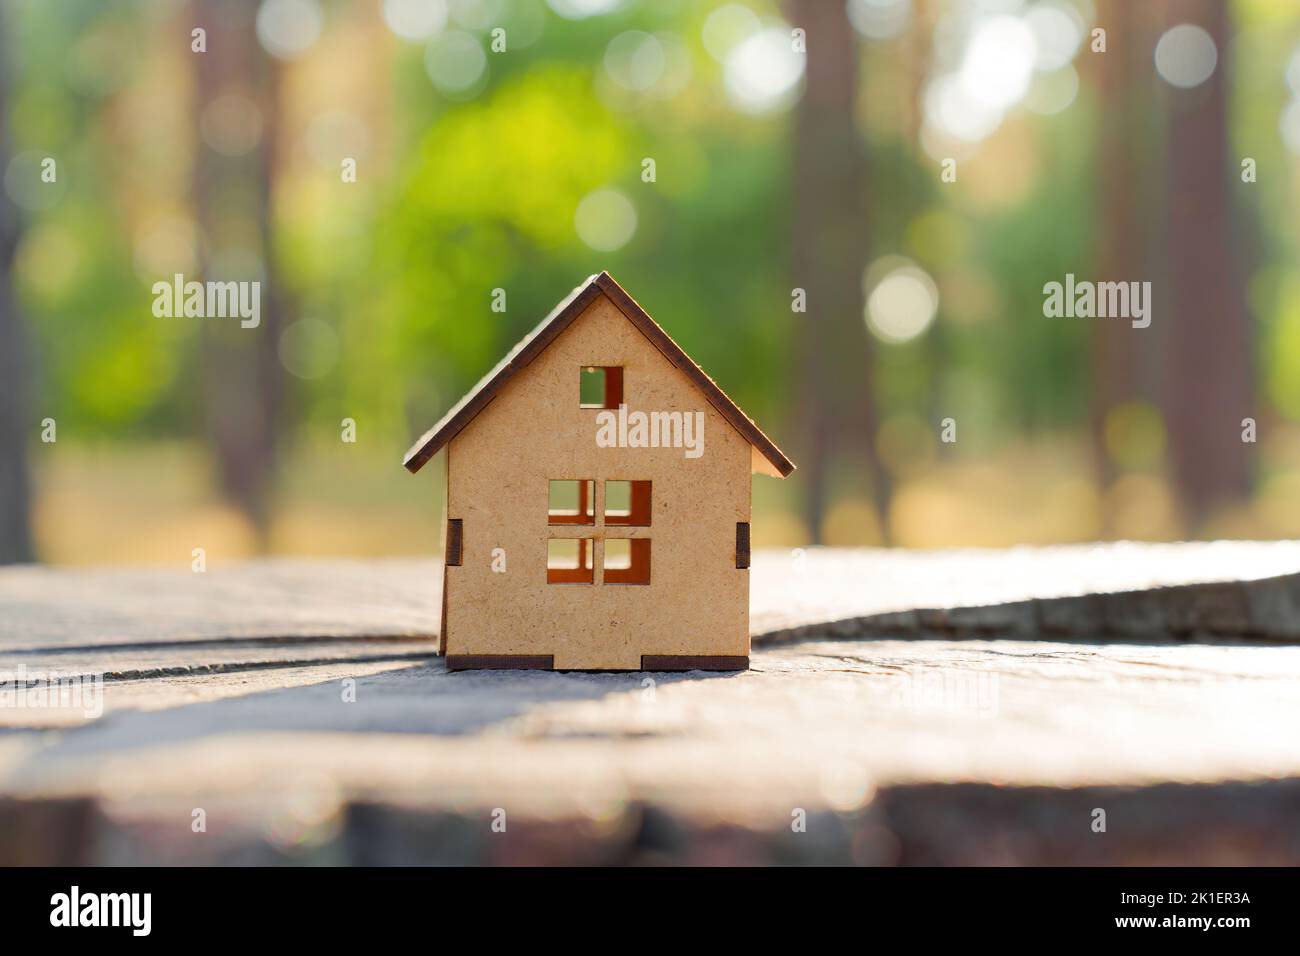 Close-up of a wooden toy house model placed on a tree stump in a forest area. Nature and real estate concept. Stock Photo